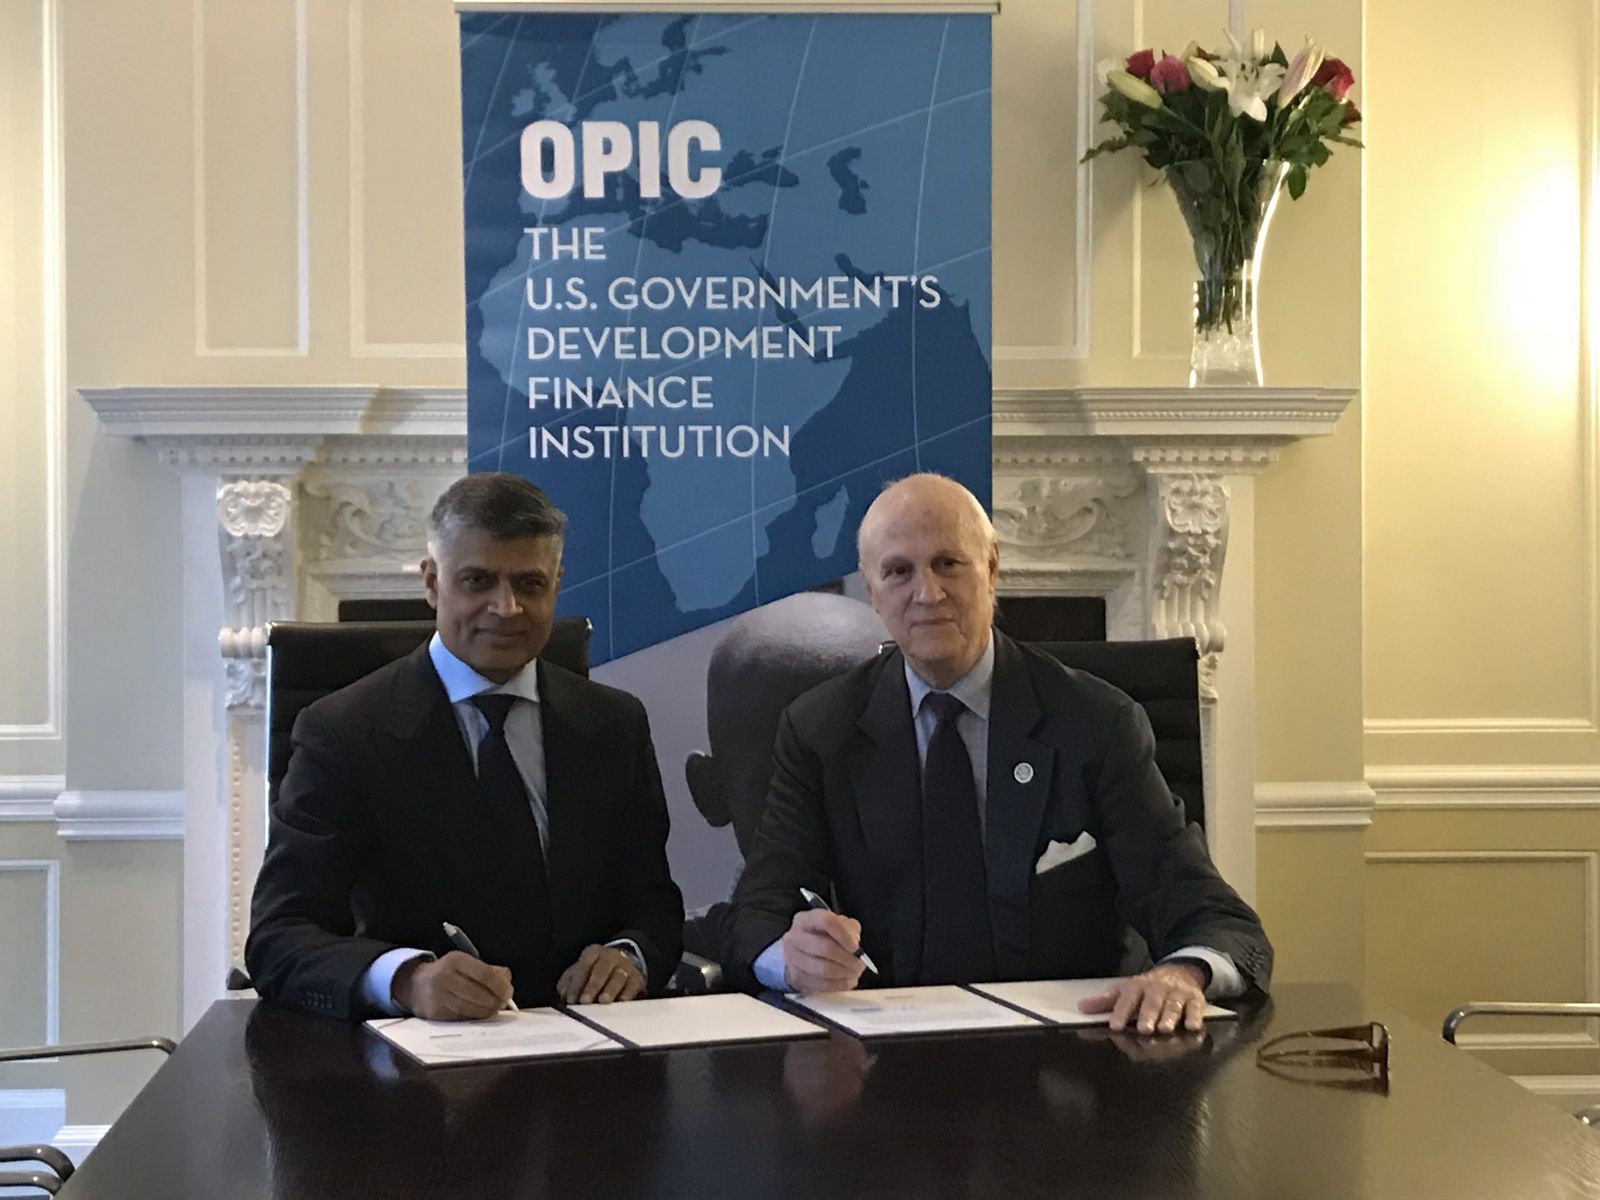 photo Frank Dunlevy and Ketan Patel signing for Greater Pacific Capital, healthcare, energy, technology, agricultural, services, India